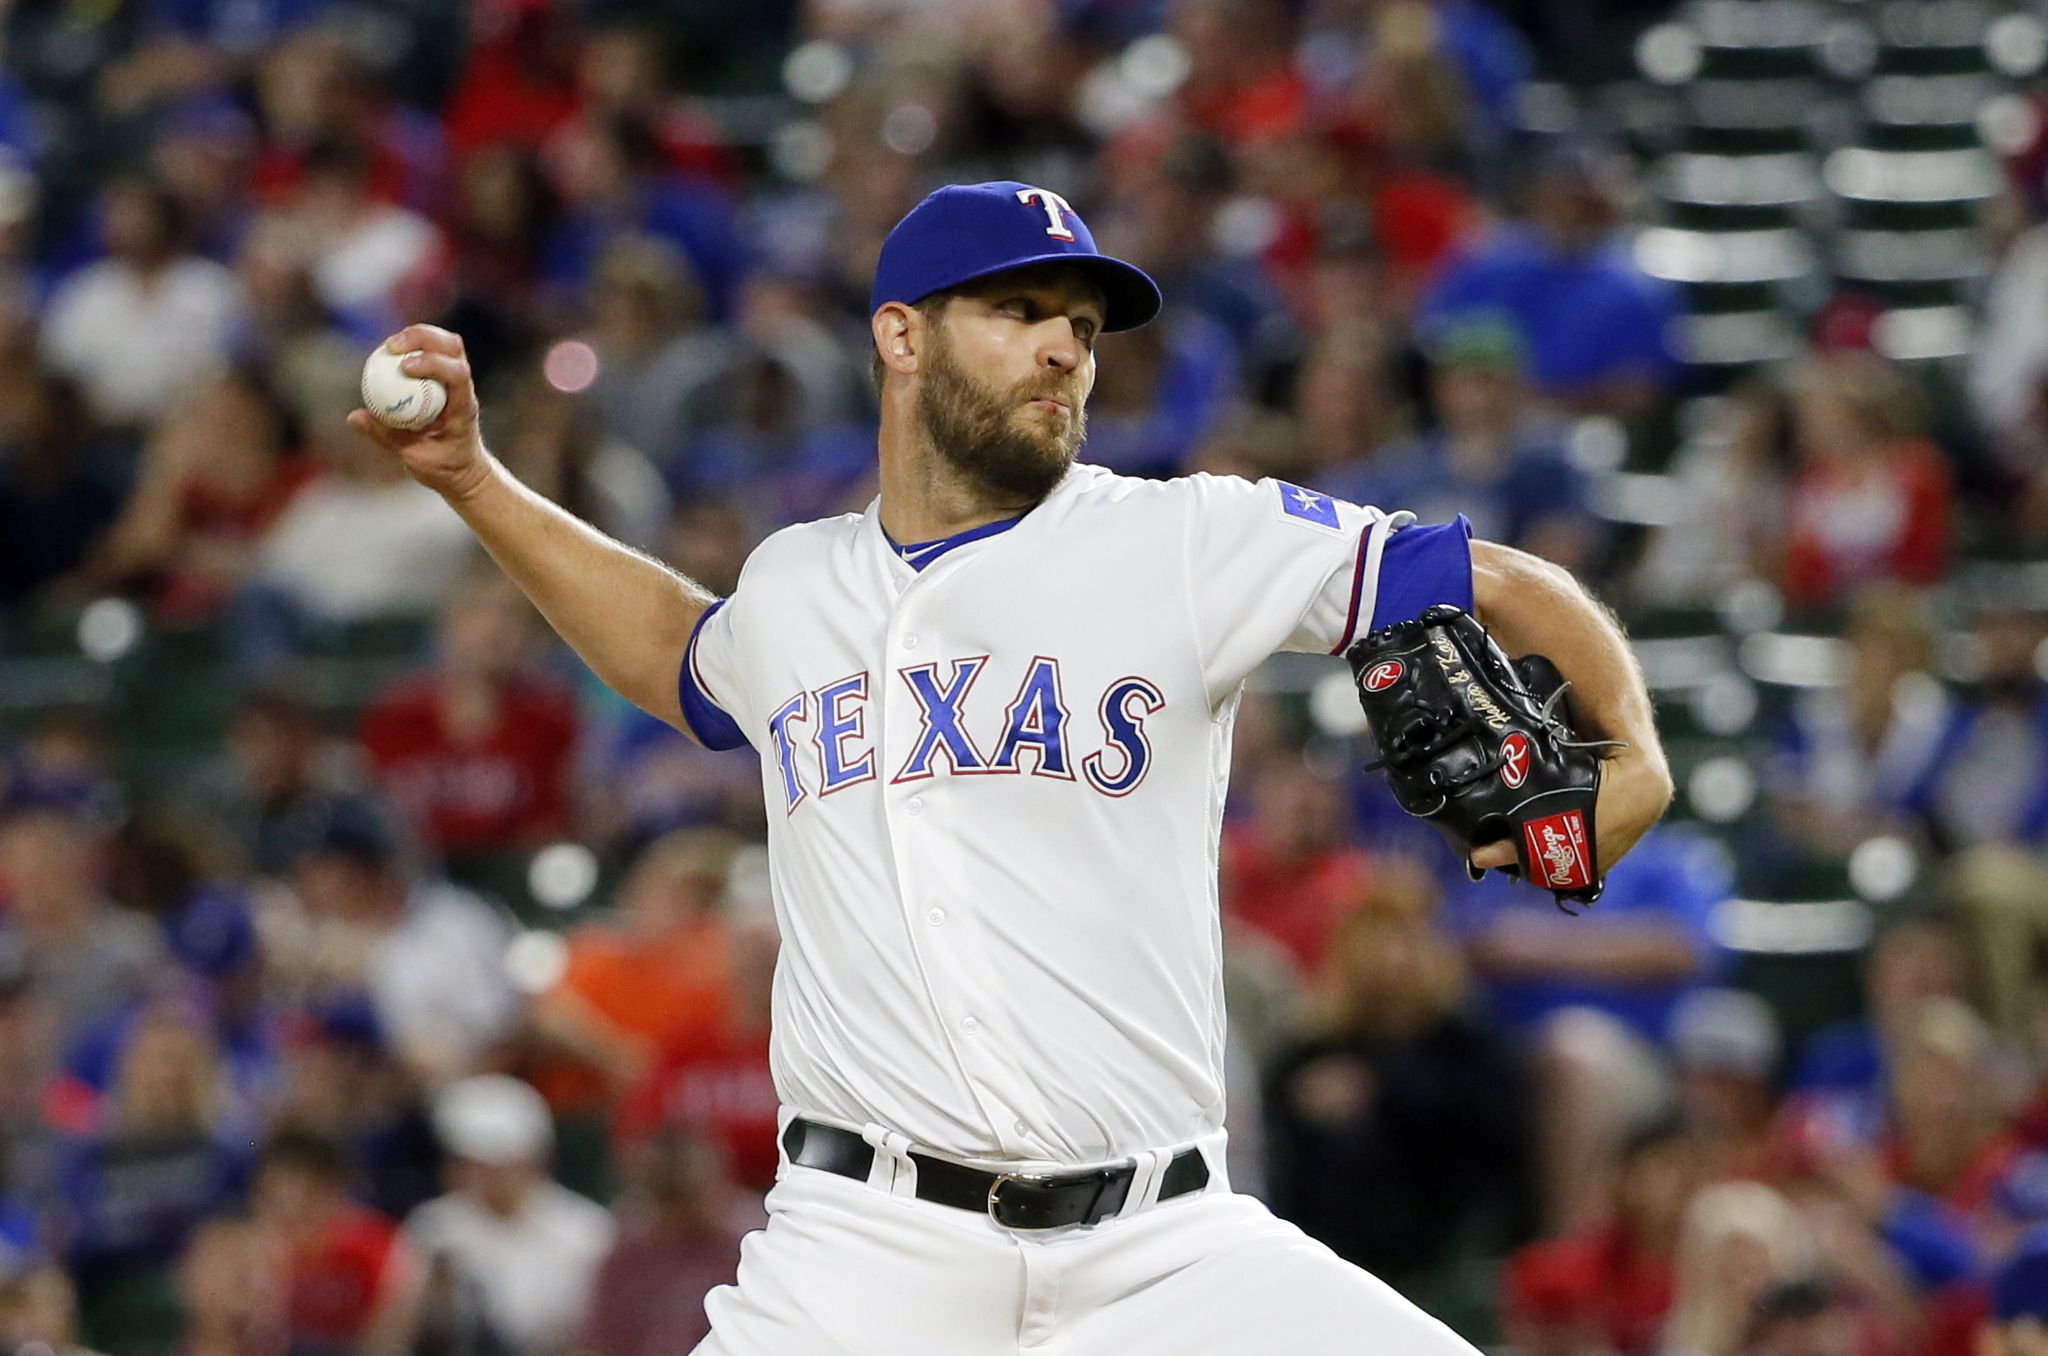 Tom Wilhelmsen, shown here pitching for the Texas Rangers in April, was traded back to the Seattle Mariners on Tuesday for a player to be named or cash. Wilhelmsen started his career with the Mariners.